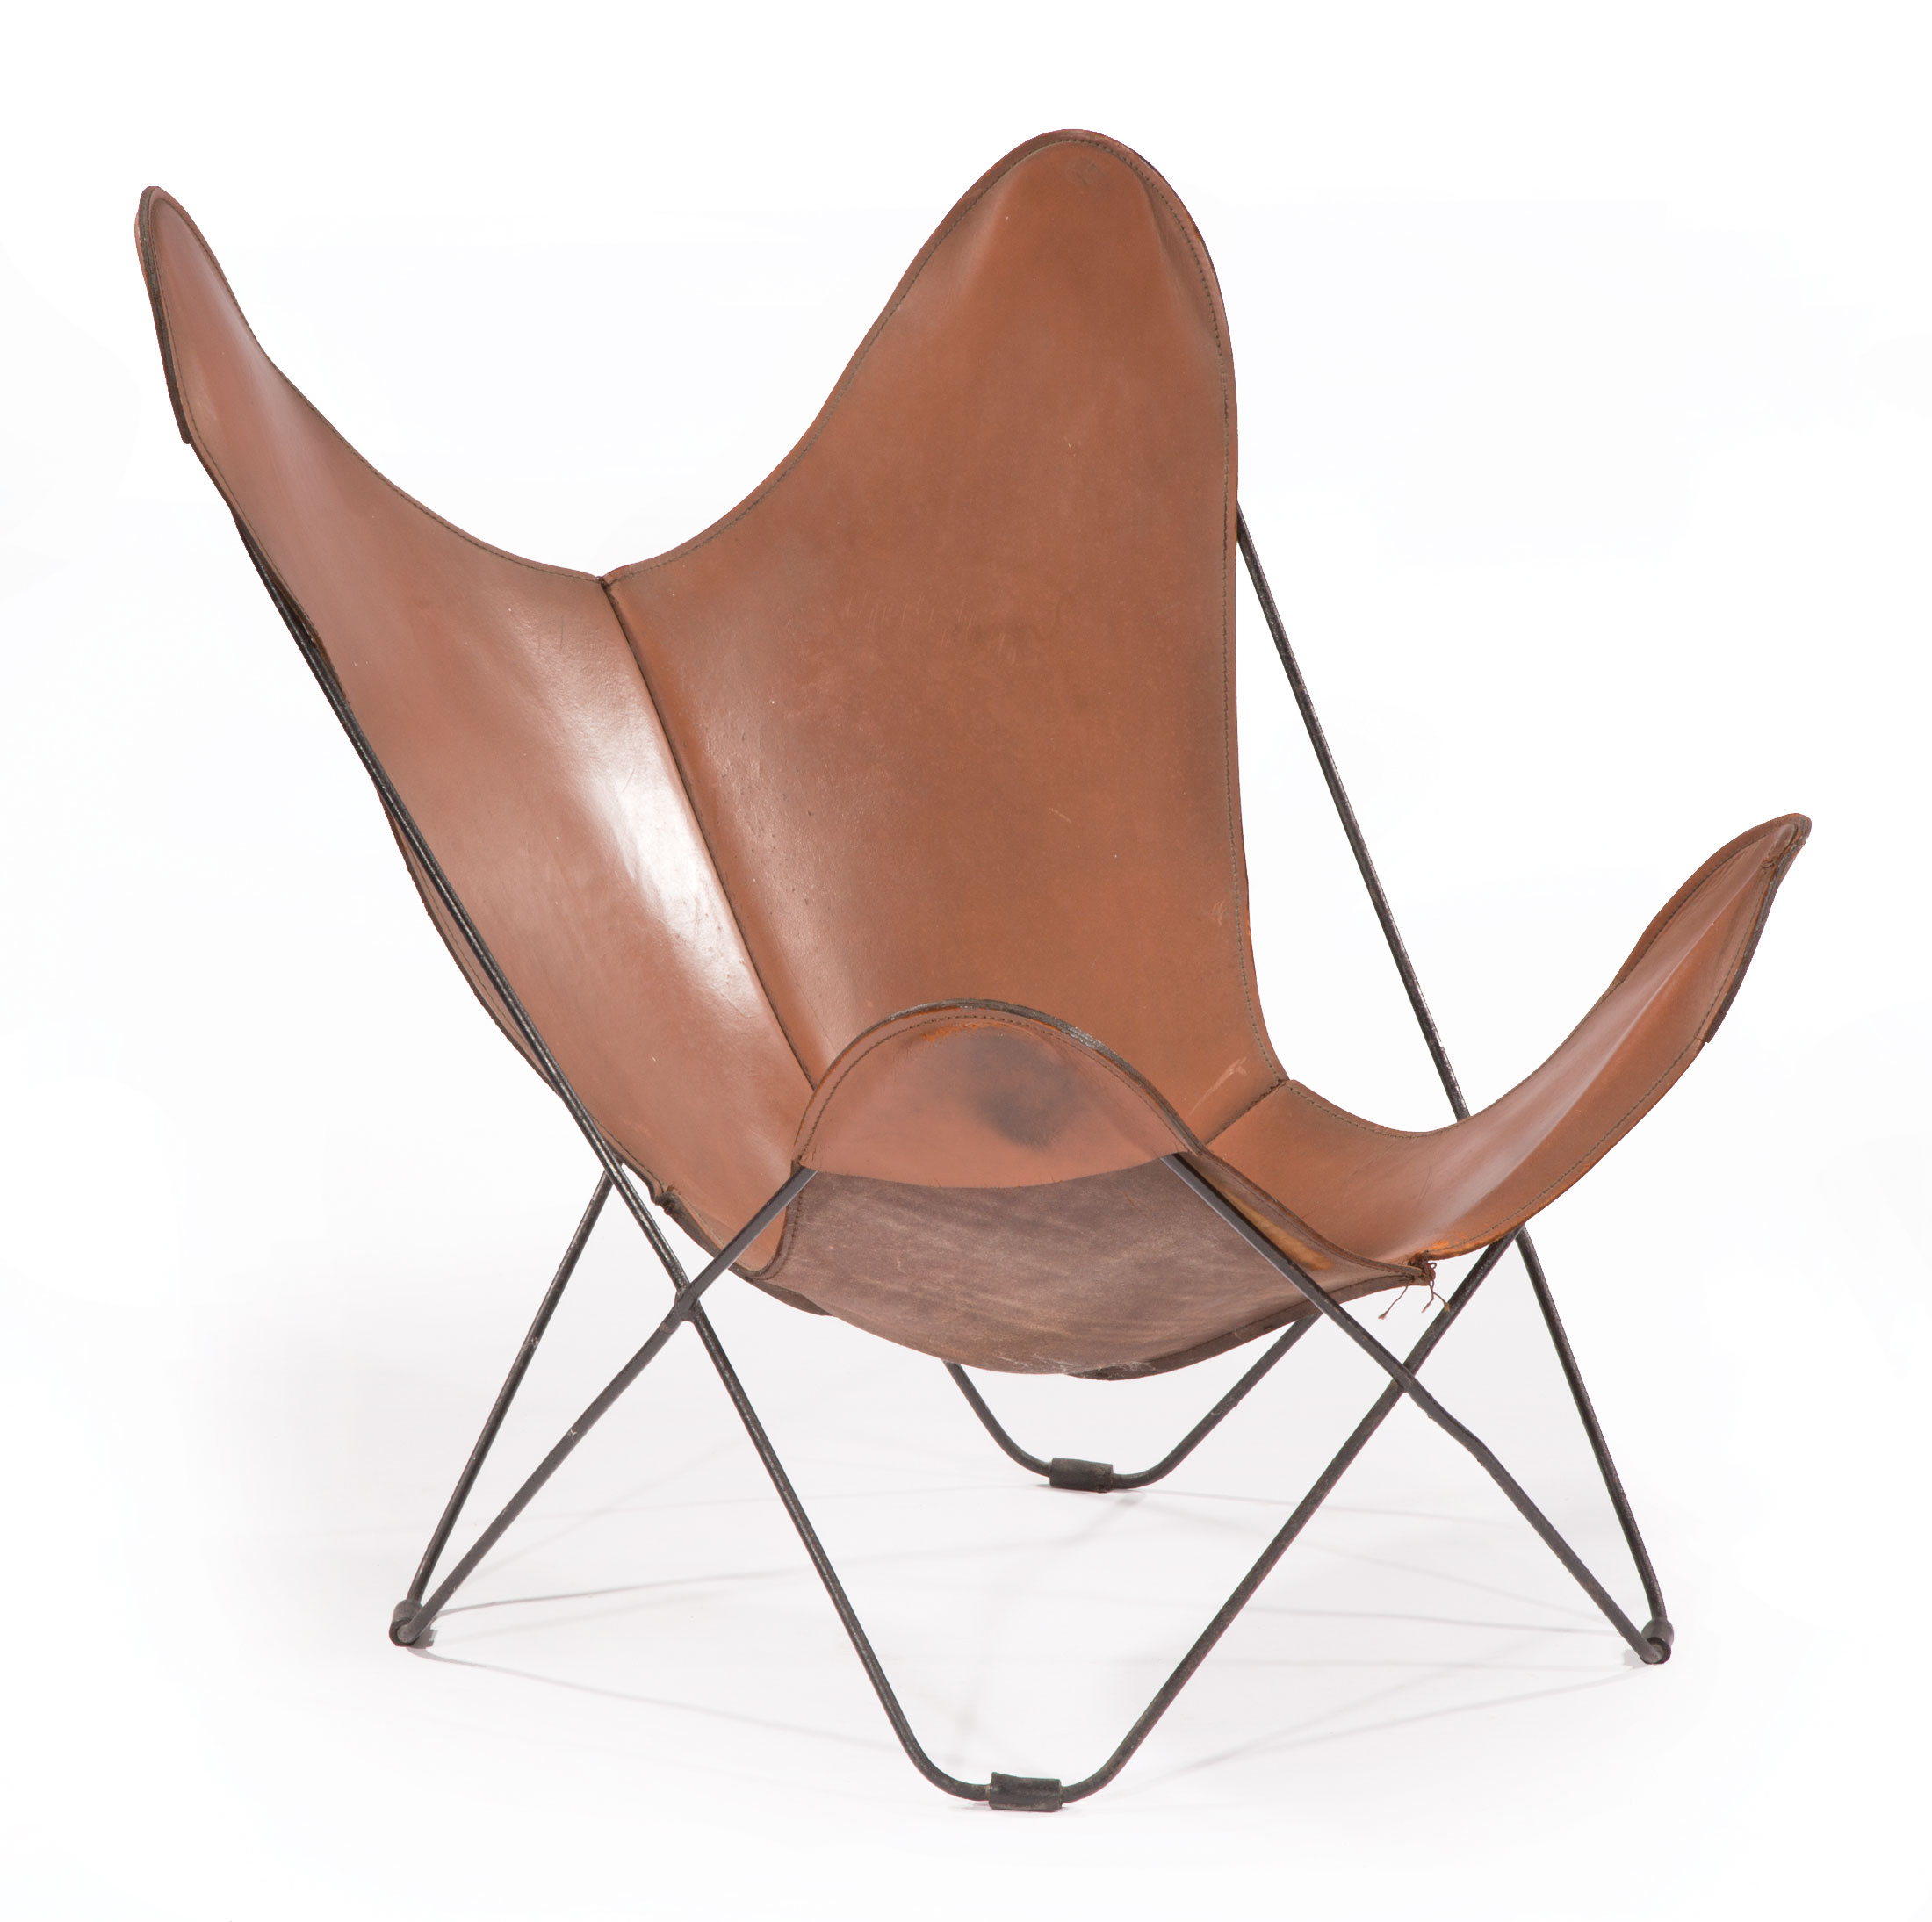 Contemporary Leather "Butterfly" Chair , metal frame, four part stitched seat , h. 33 in., w. 30